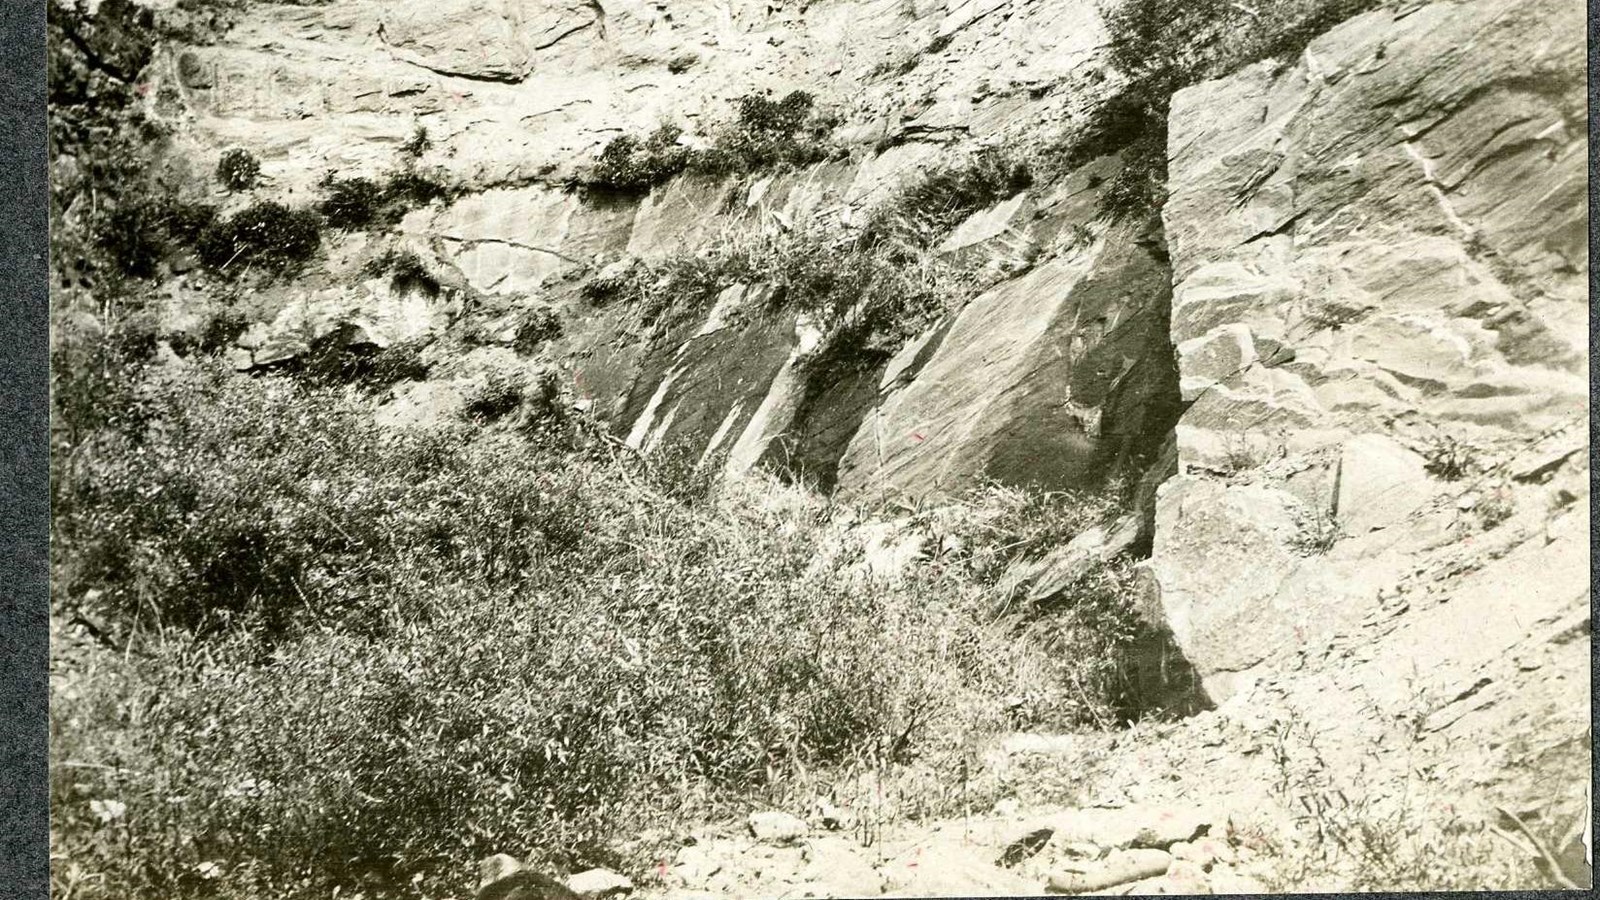 Black and white of rocky area with shrubs sticking out of rocks, hard shrubs below, fence above